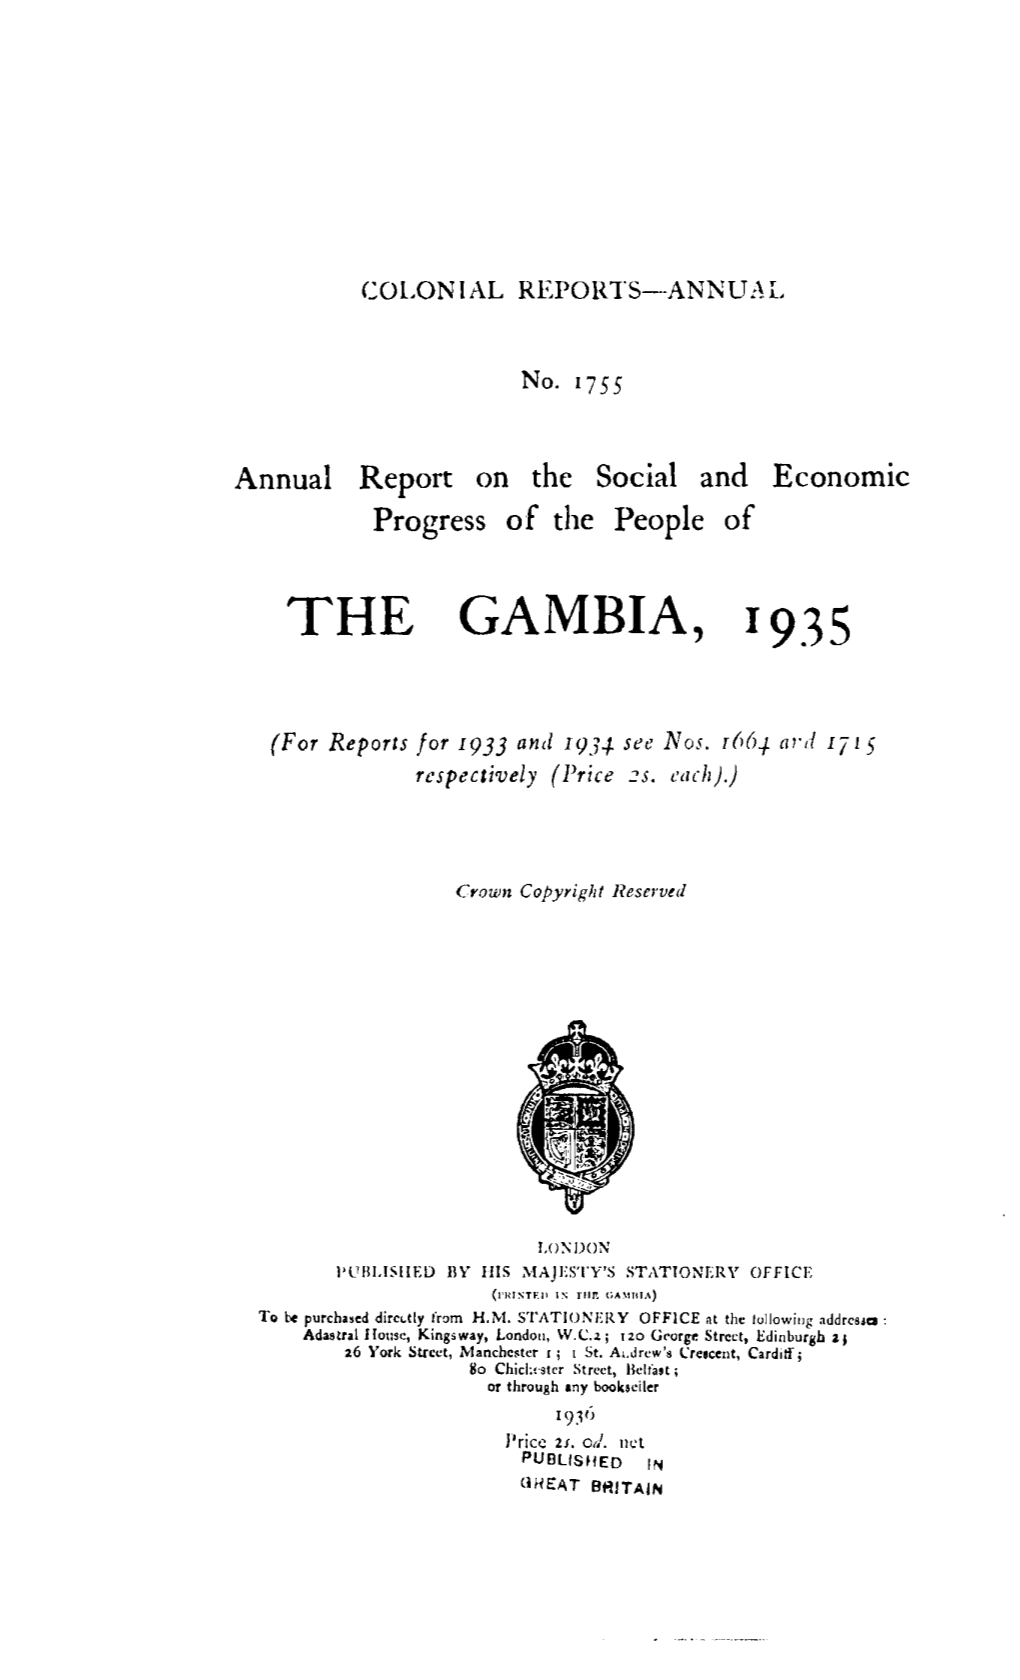 Annual Report of the Colonies. Gambia 1935